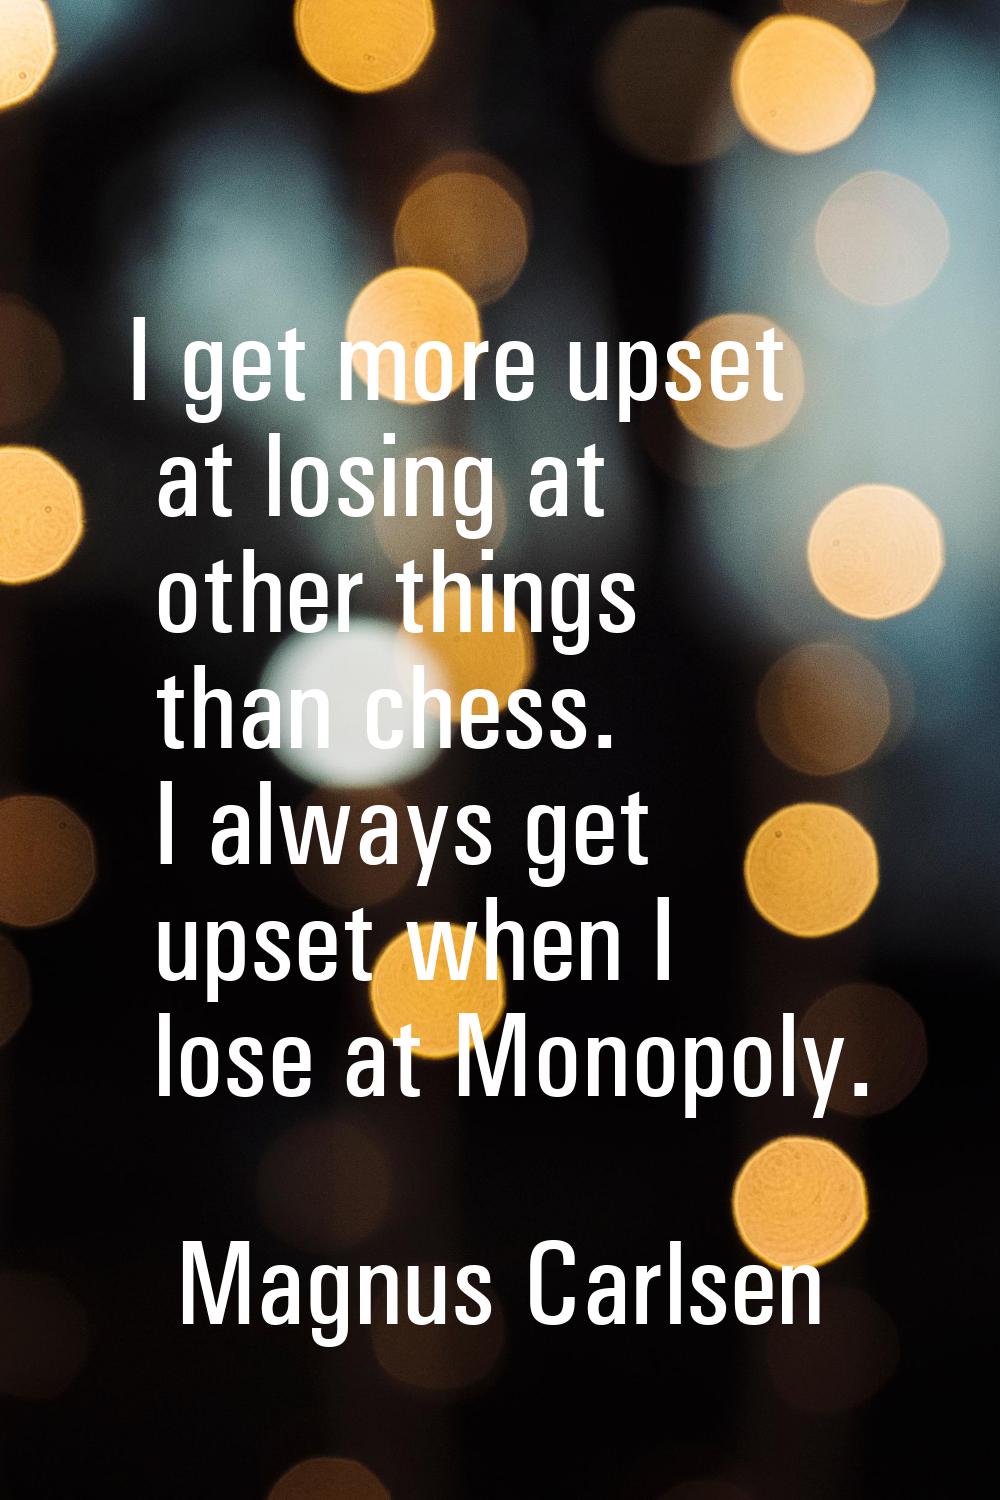 I get more upset at losing at other things than chess. I always get upset when I lose at Monopoly.